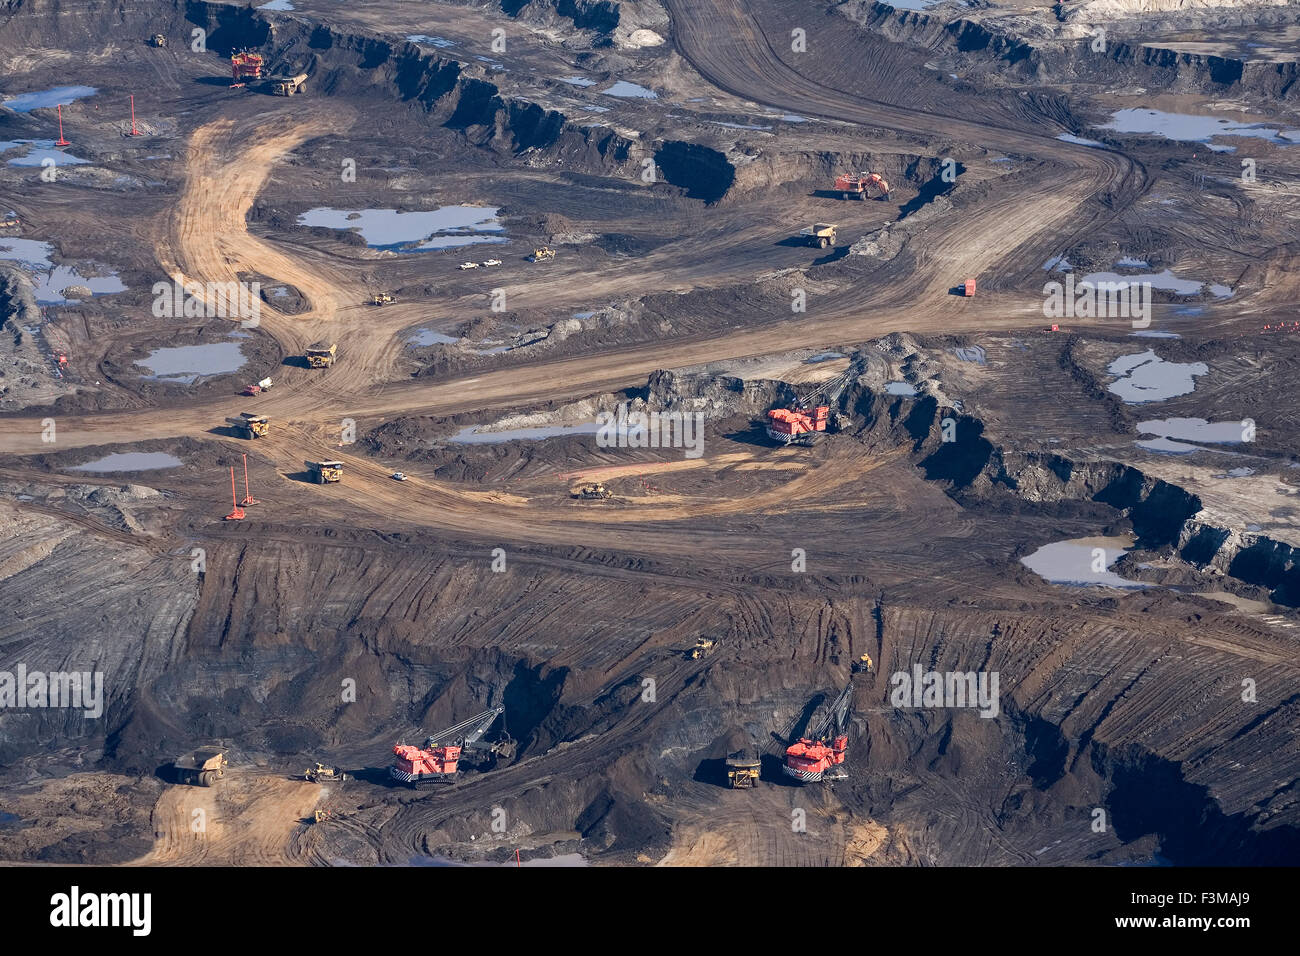 Oil Sands Mining Operations At Syncrude Canada's Aurora Mine Project, Fort Mcmurray, Alberta Stock Photo